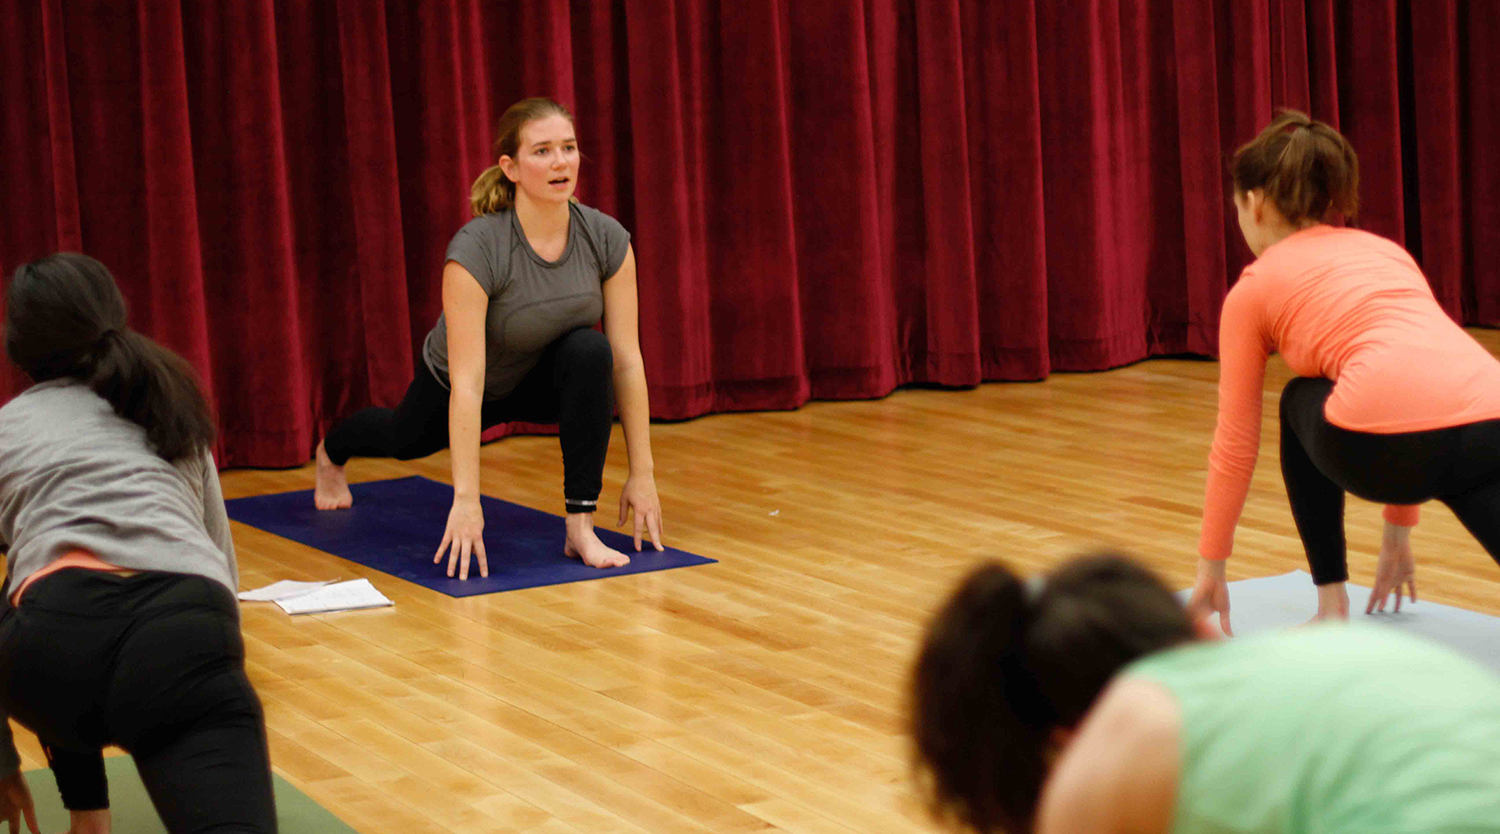 Katie McLaughlin '15 teaches a WesBAM! class called Vinyasa Flow Fusion, which combines meditation, breathing techniques and traditional asana practice for whole body health and happiness.